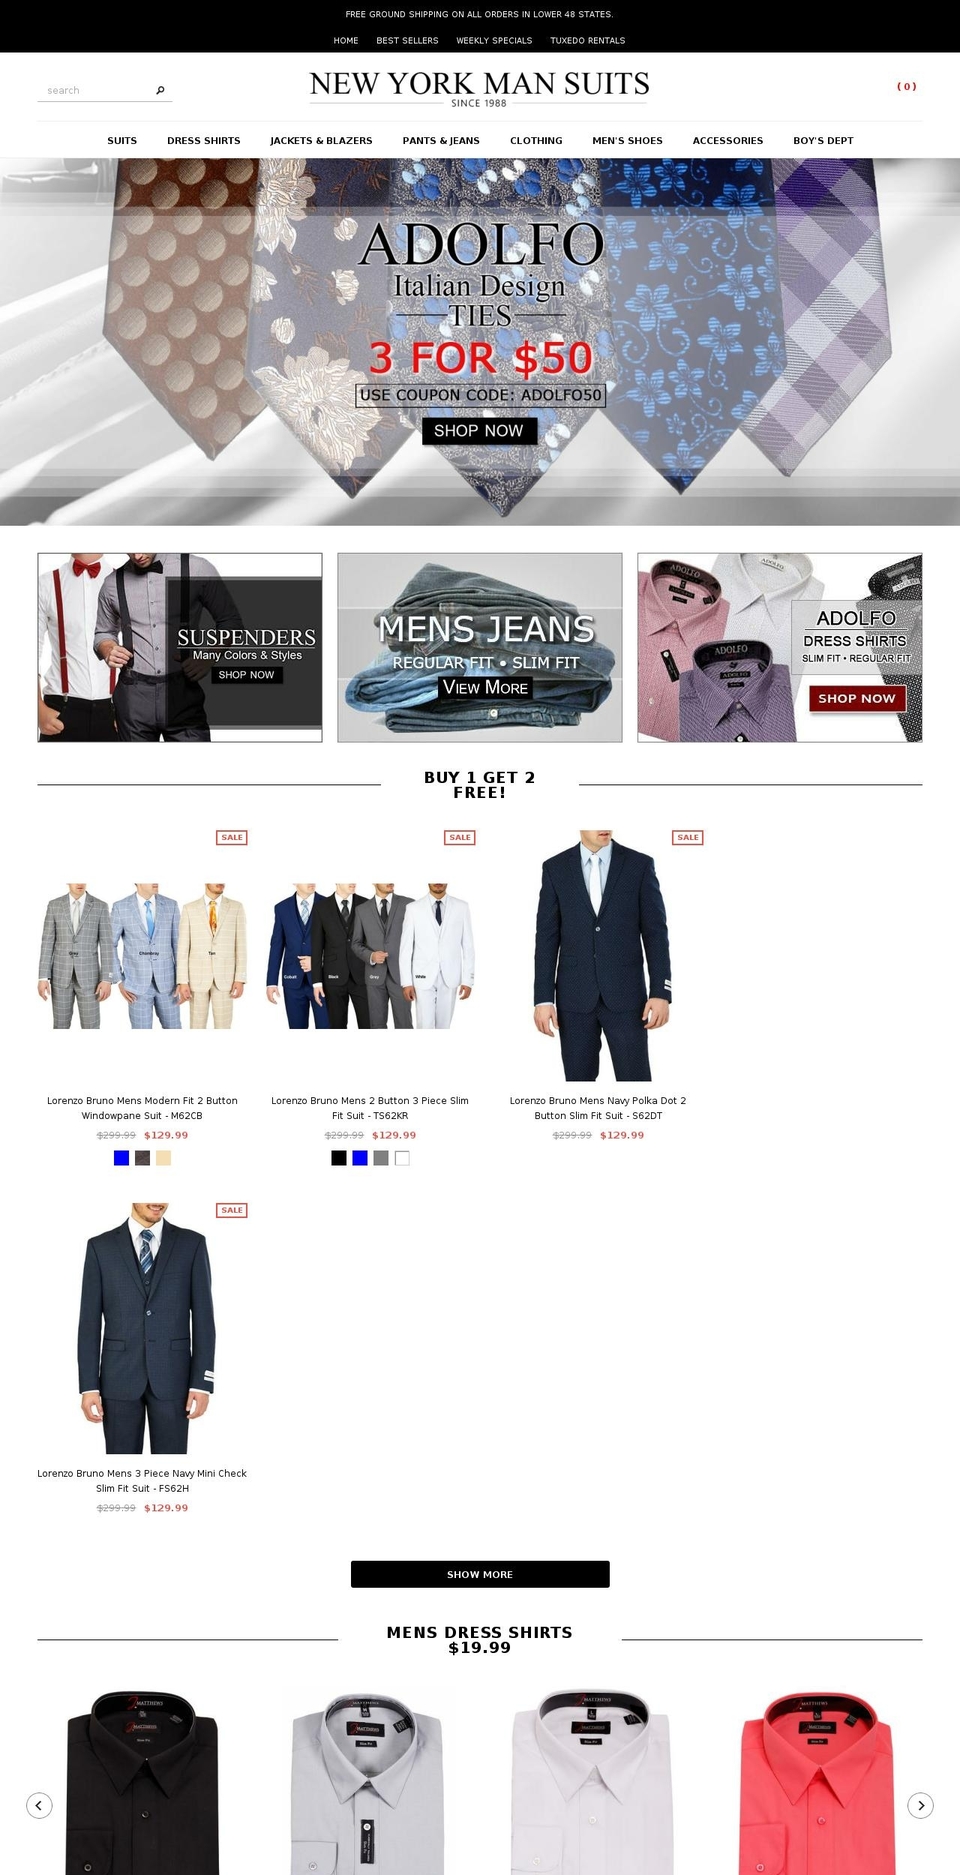 Made With ❤ By Minion Made Shopify theme site example newyorkmansuits.com